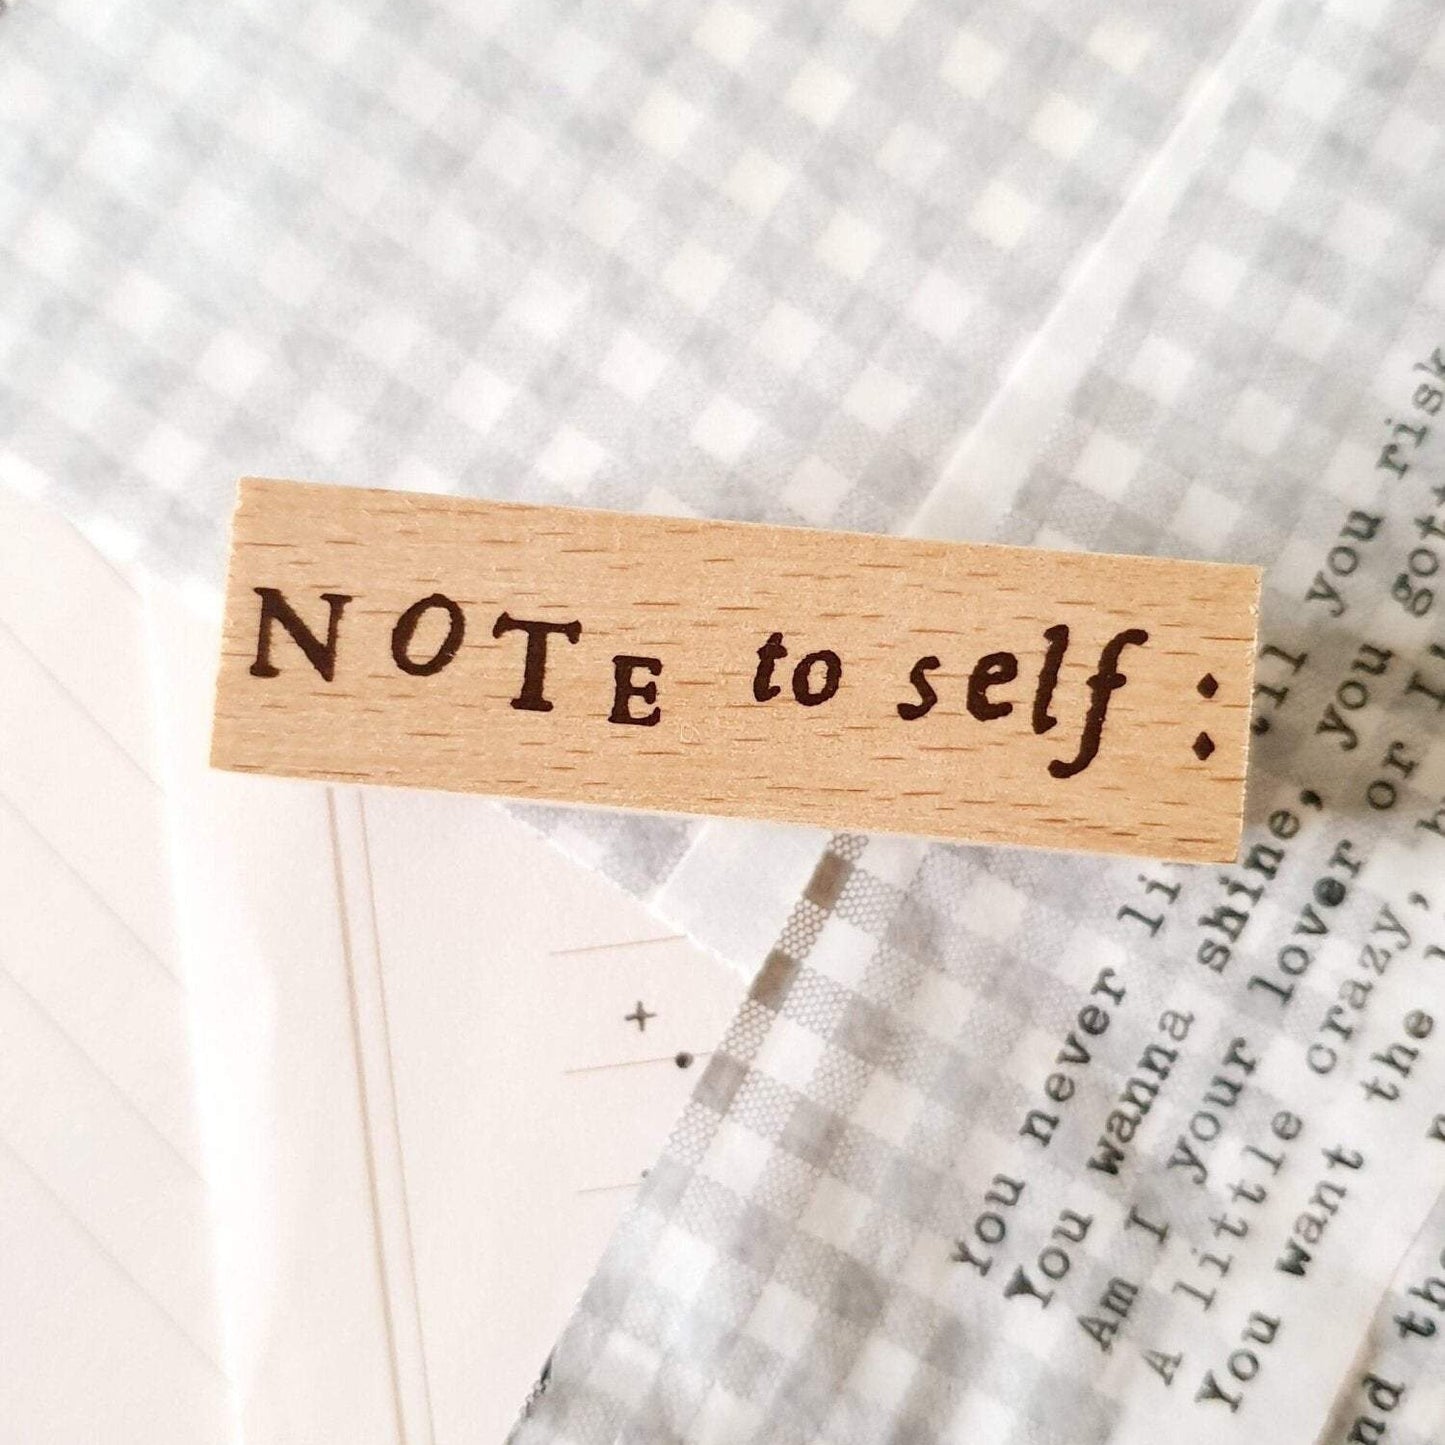 Yeon Charm Note to Self Rubber Stamp, 1 PC